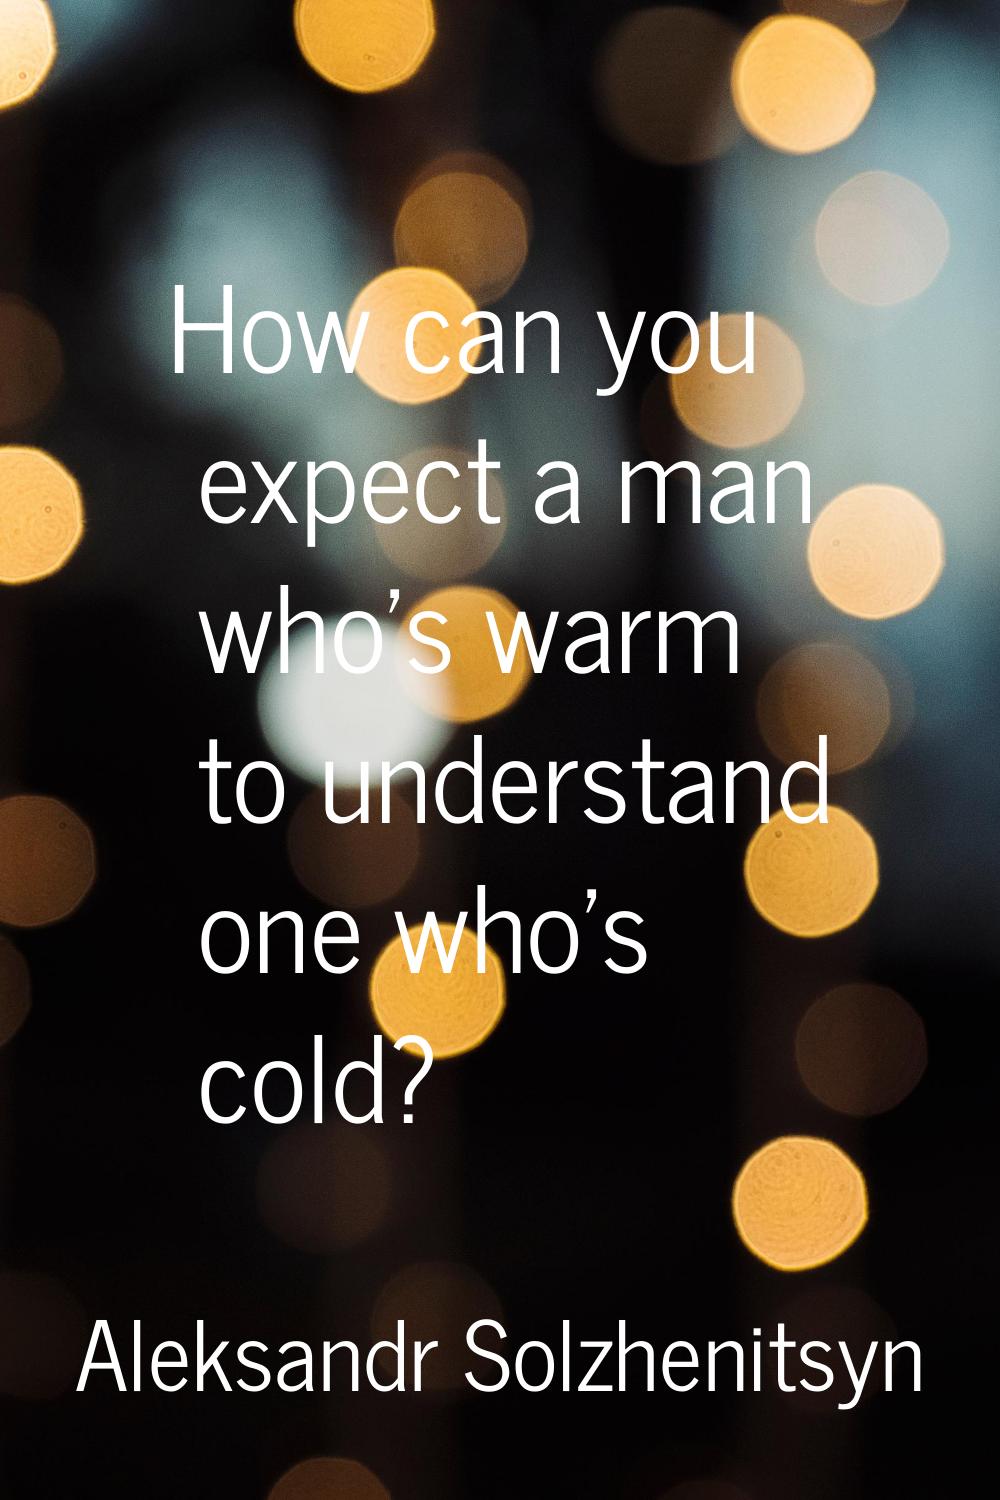 How can you expect a man who's warm to understand one who's cold?